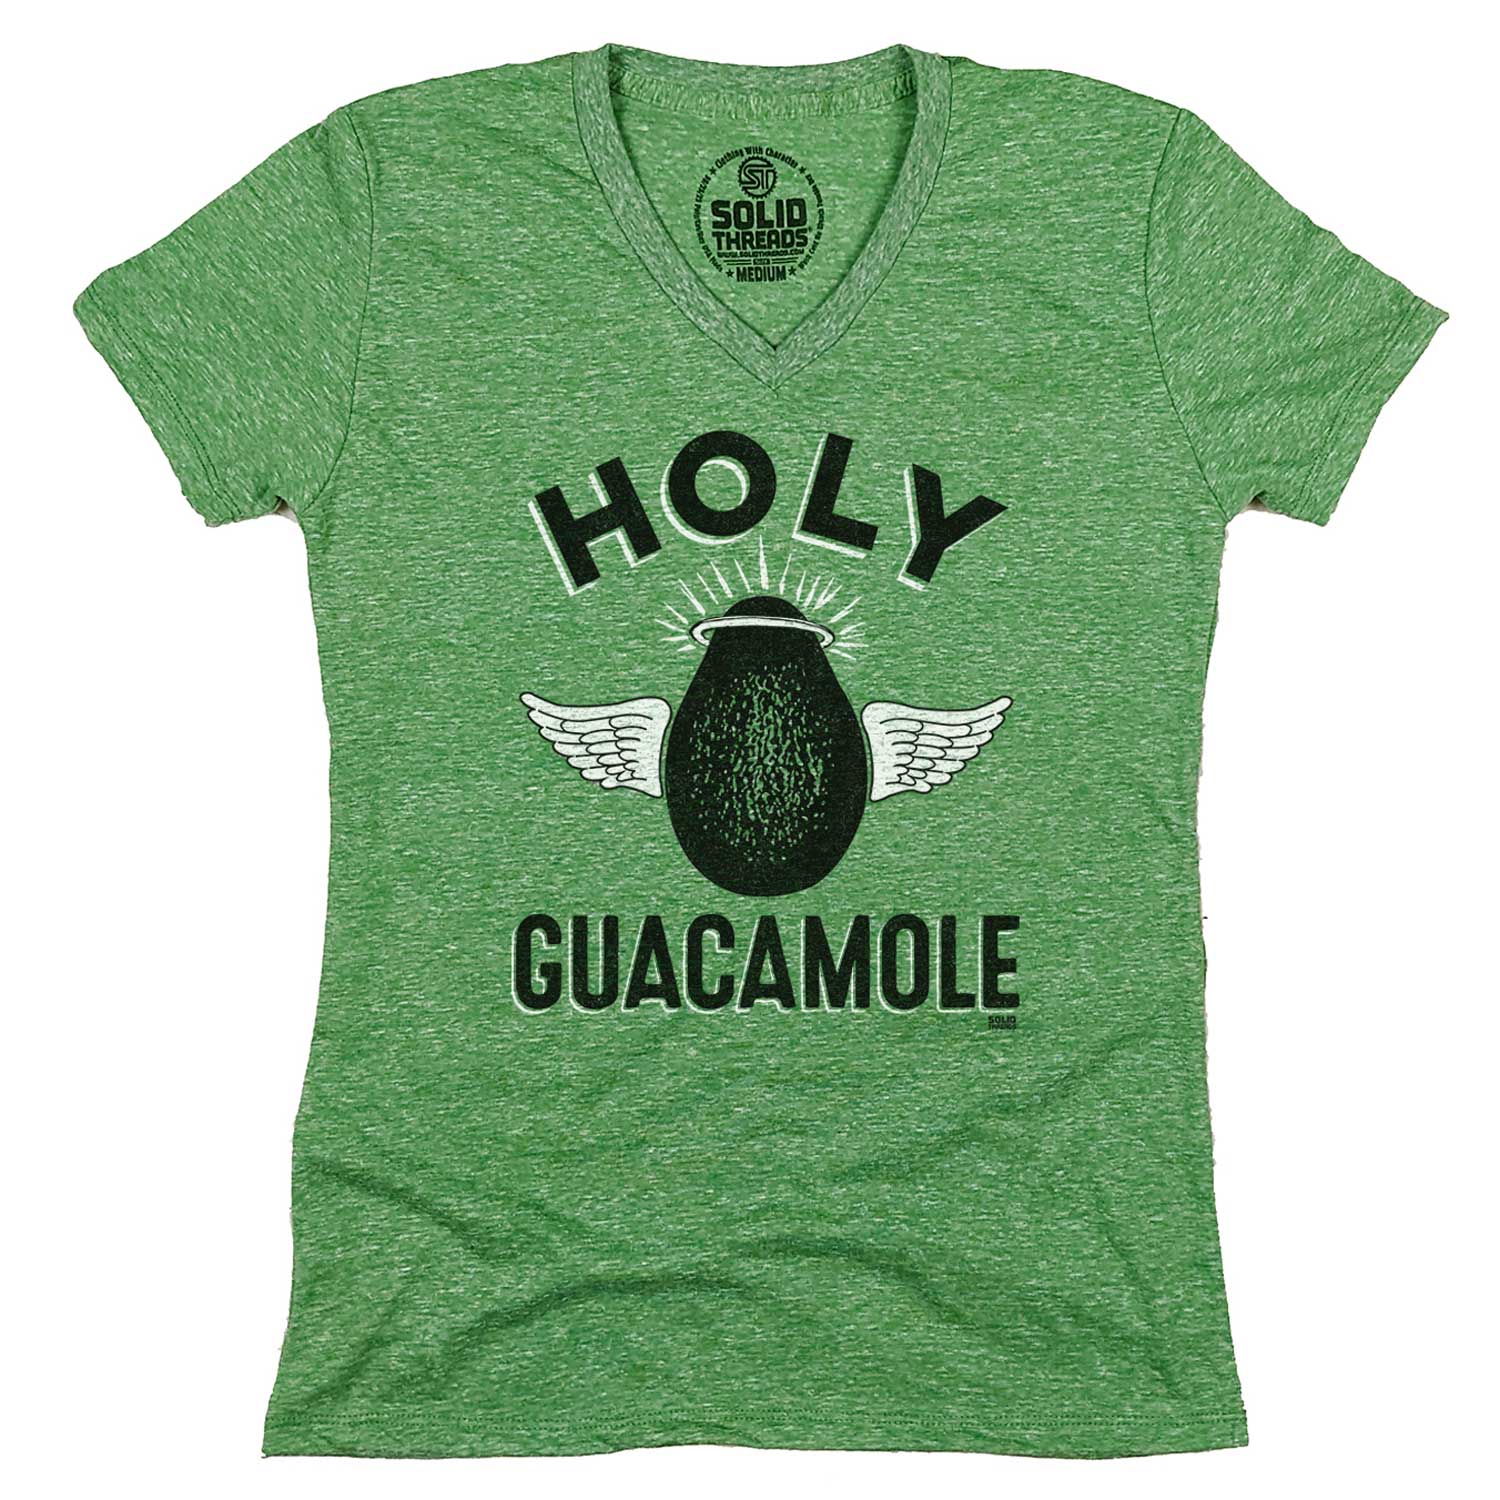 Women's Holy Guacamole Vintage Graphic V-Neck Tee | Funny Avocado T-shirt | Solid Threads